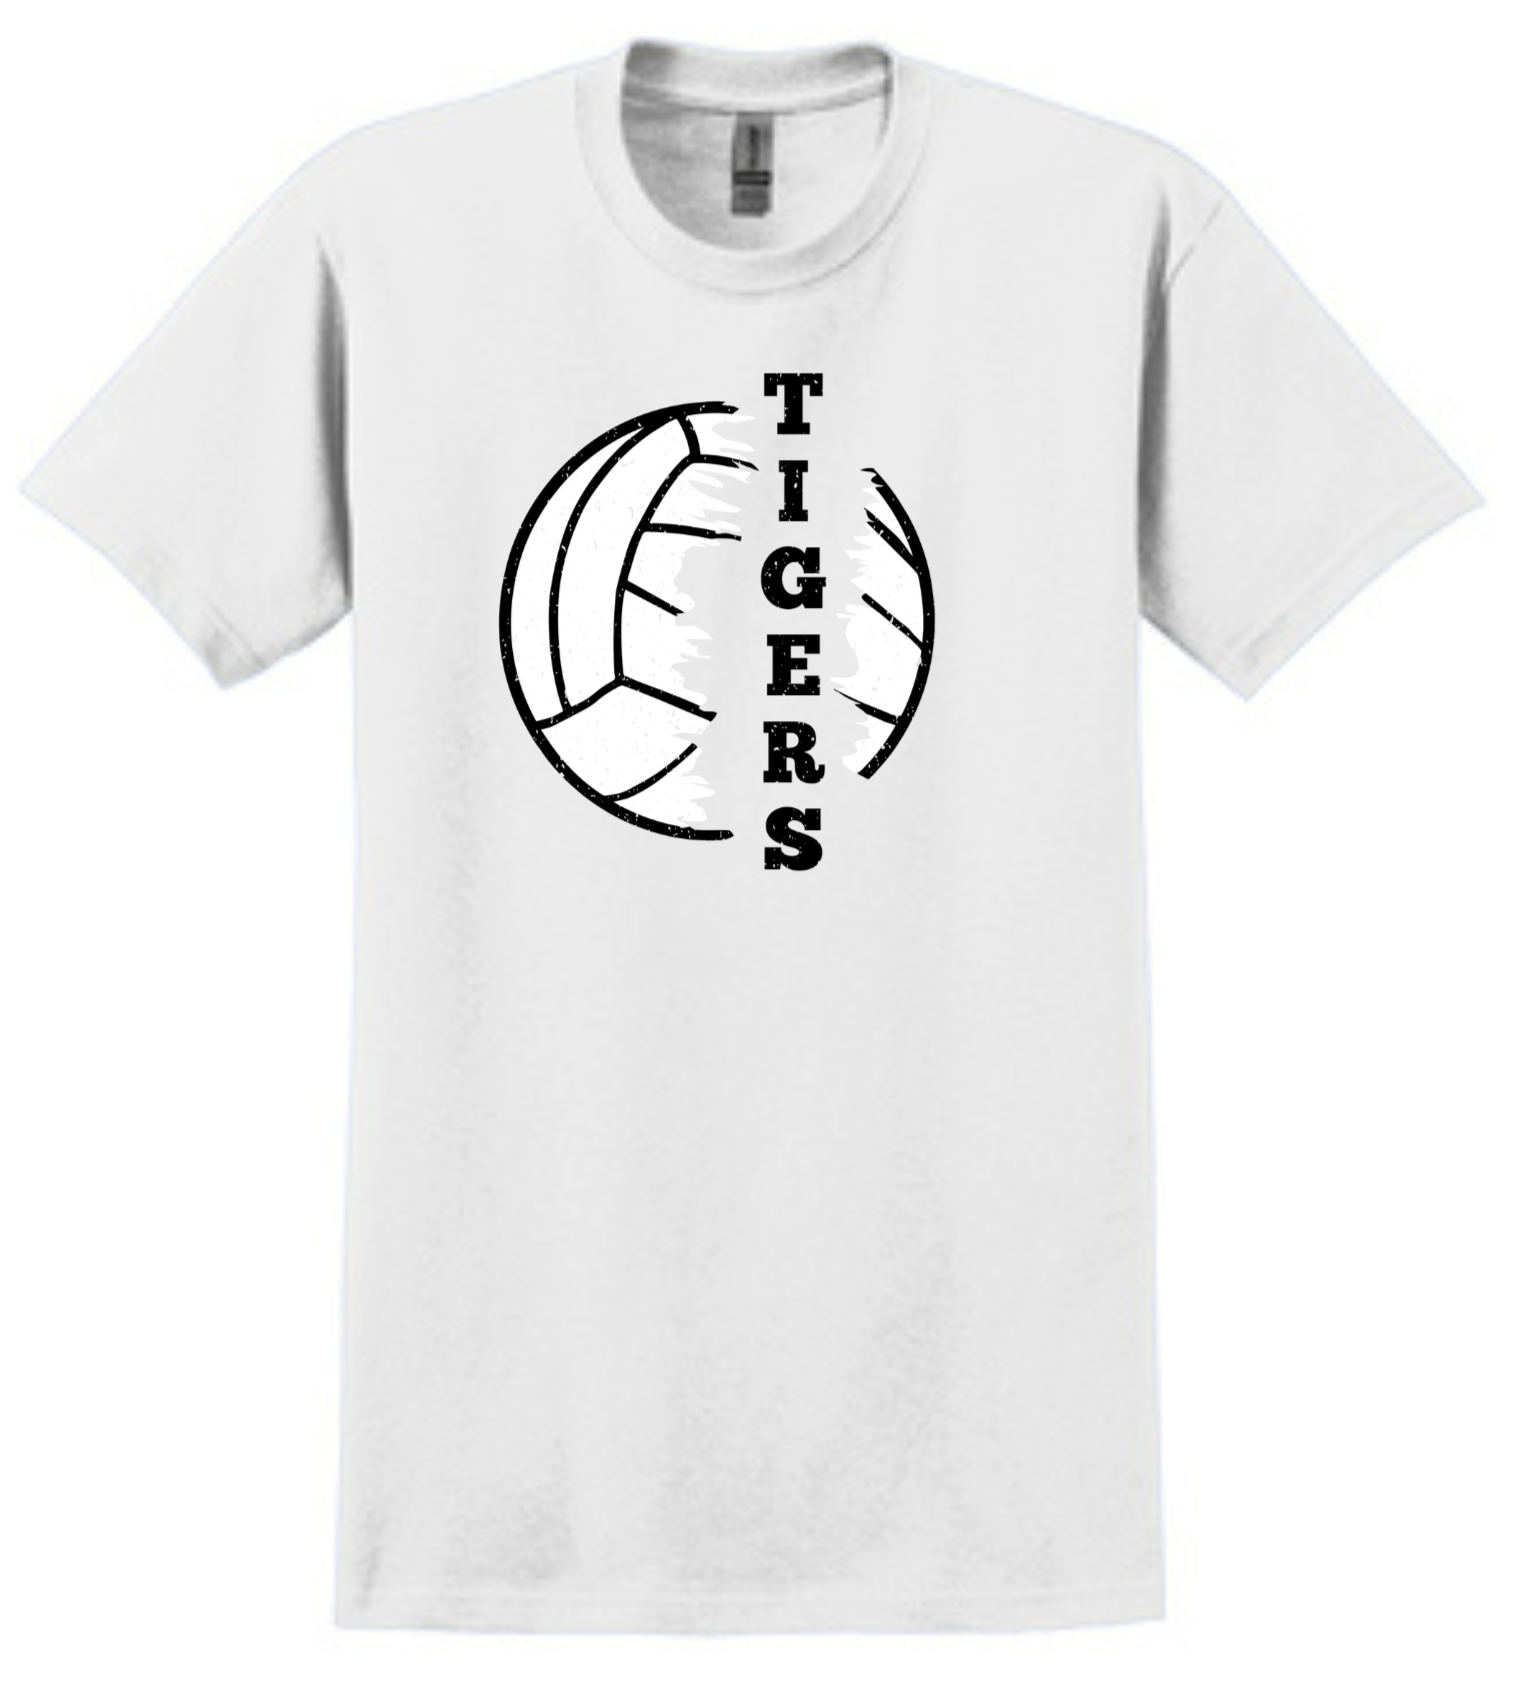 Spencer Tigers Volleyball - NEW DTG